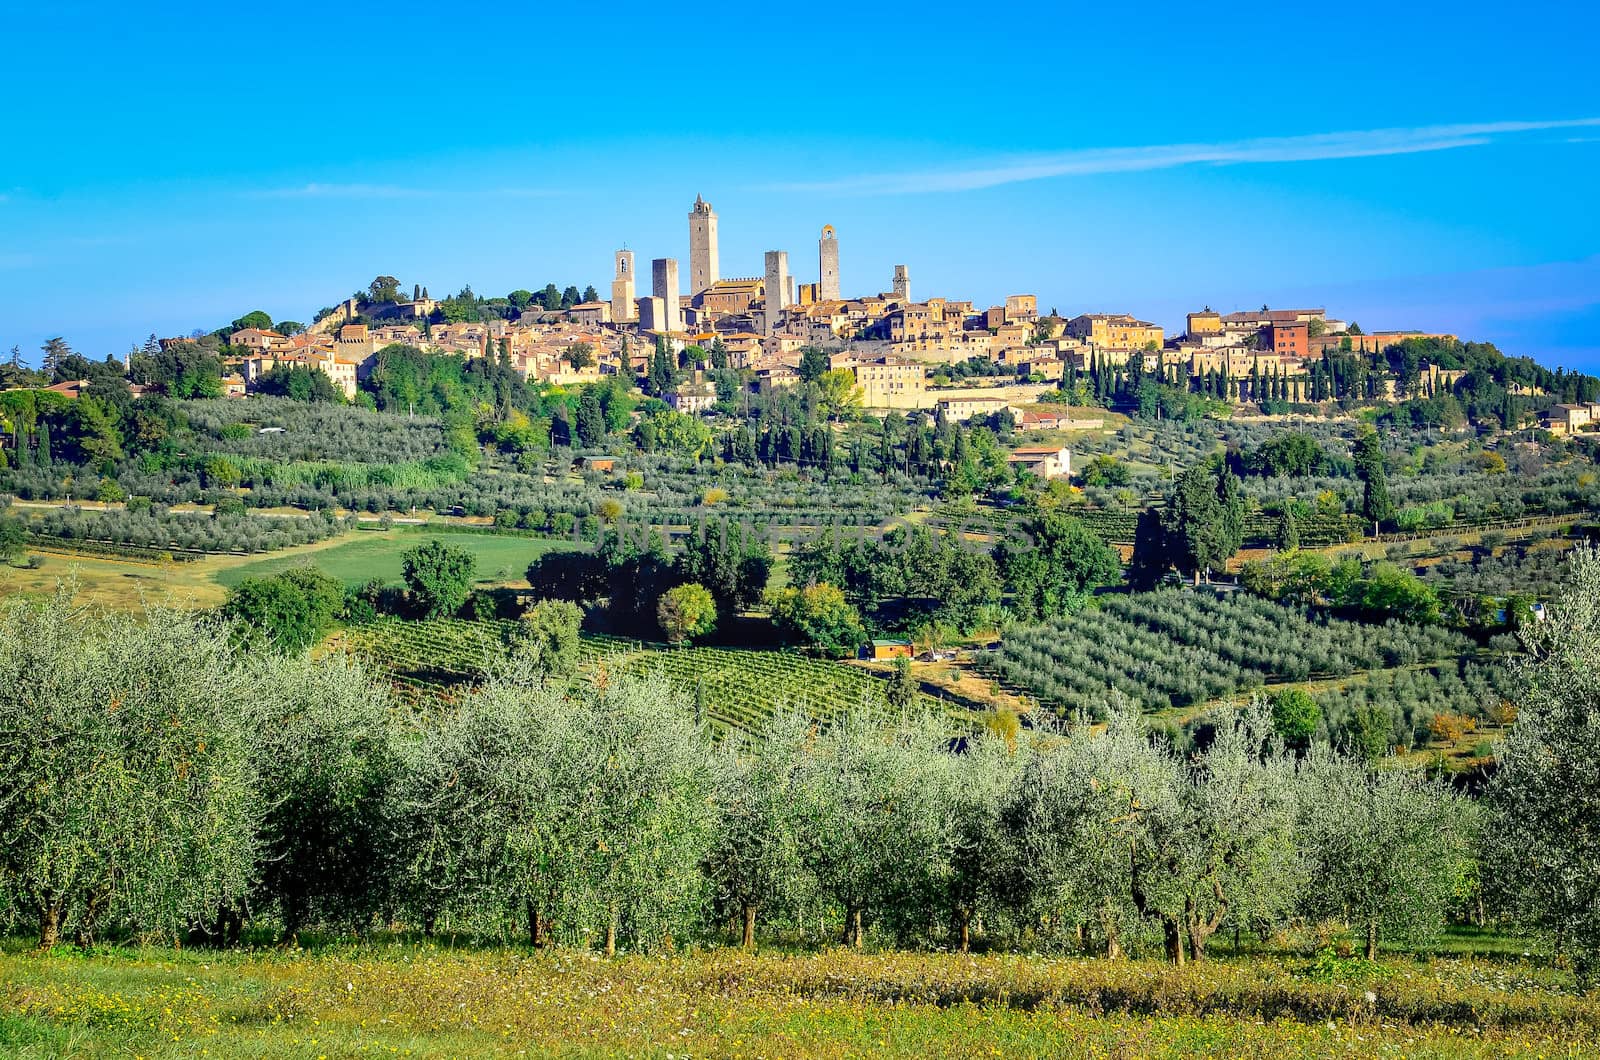 Scenic landscape view of San Gimignano, Italy by martinm303